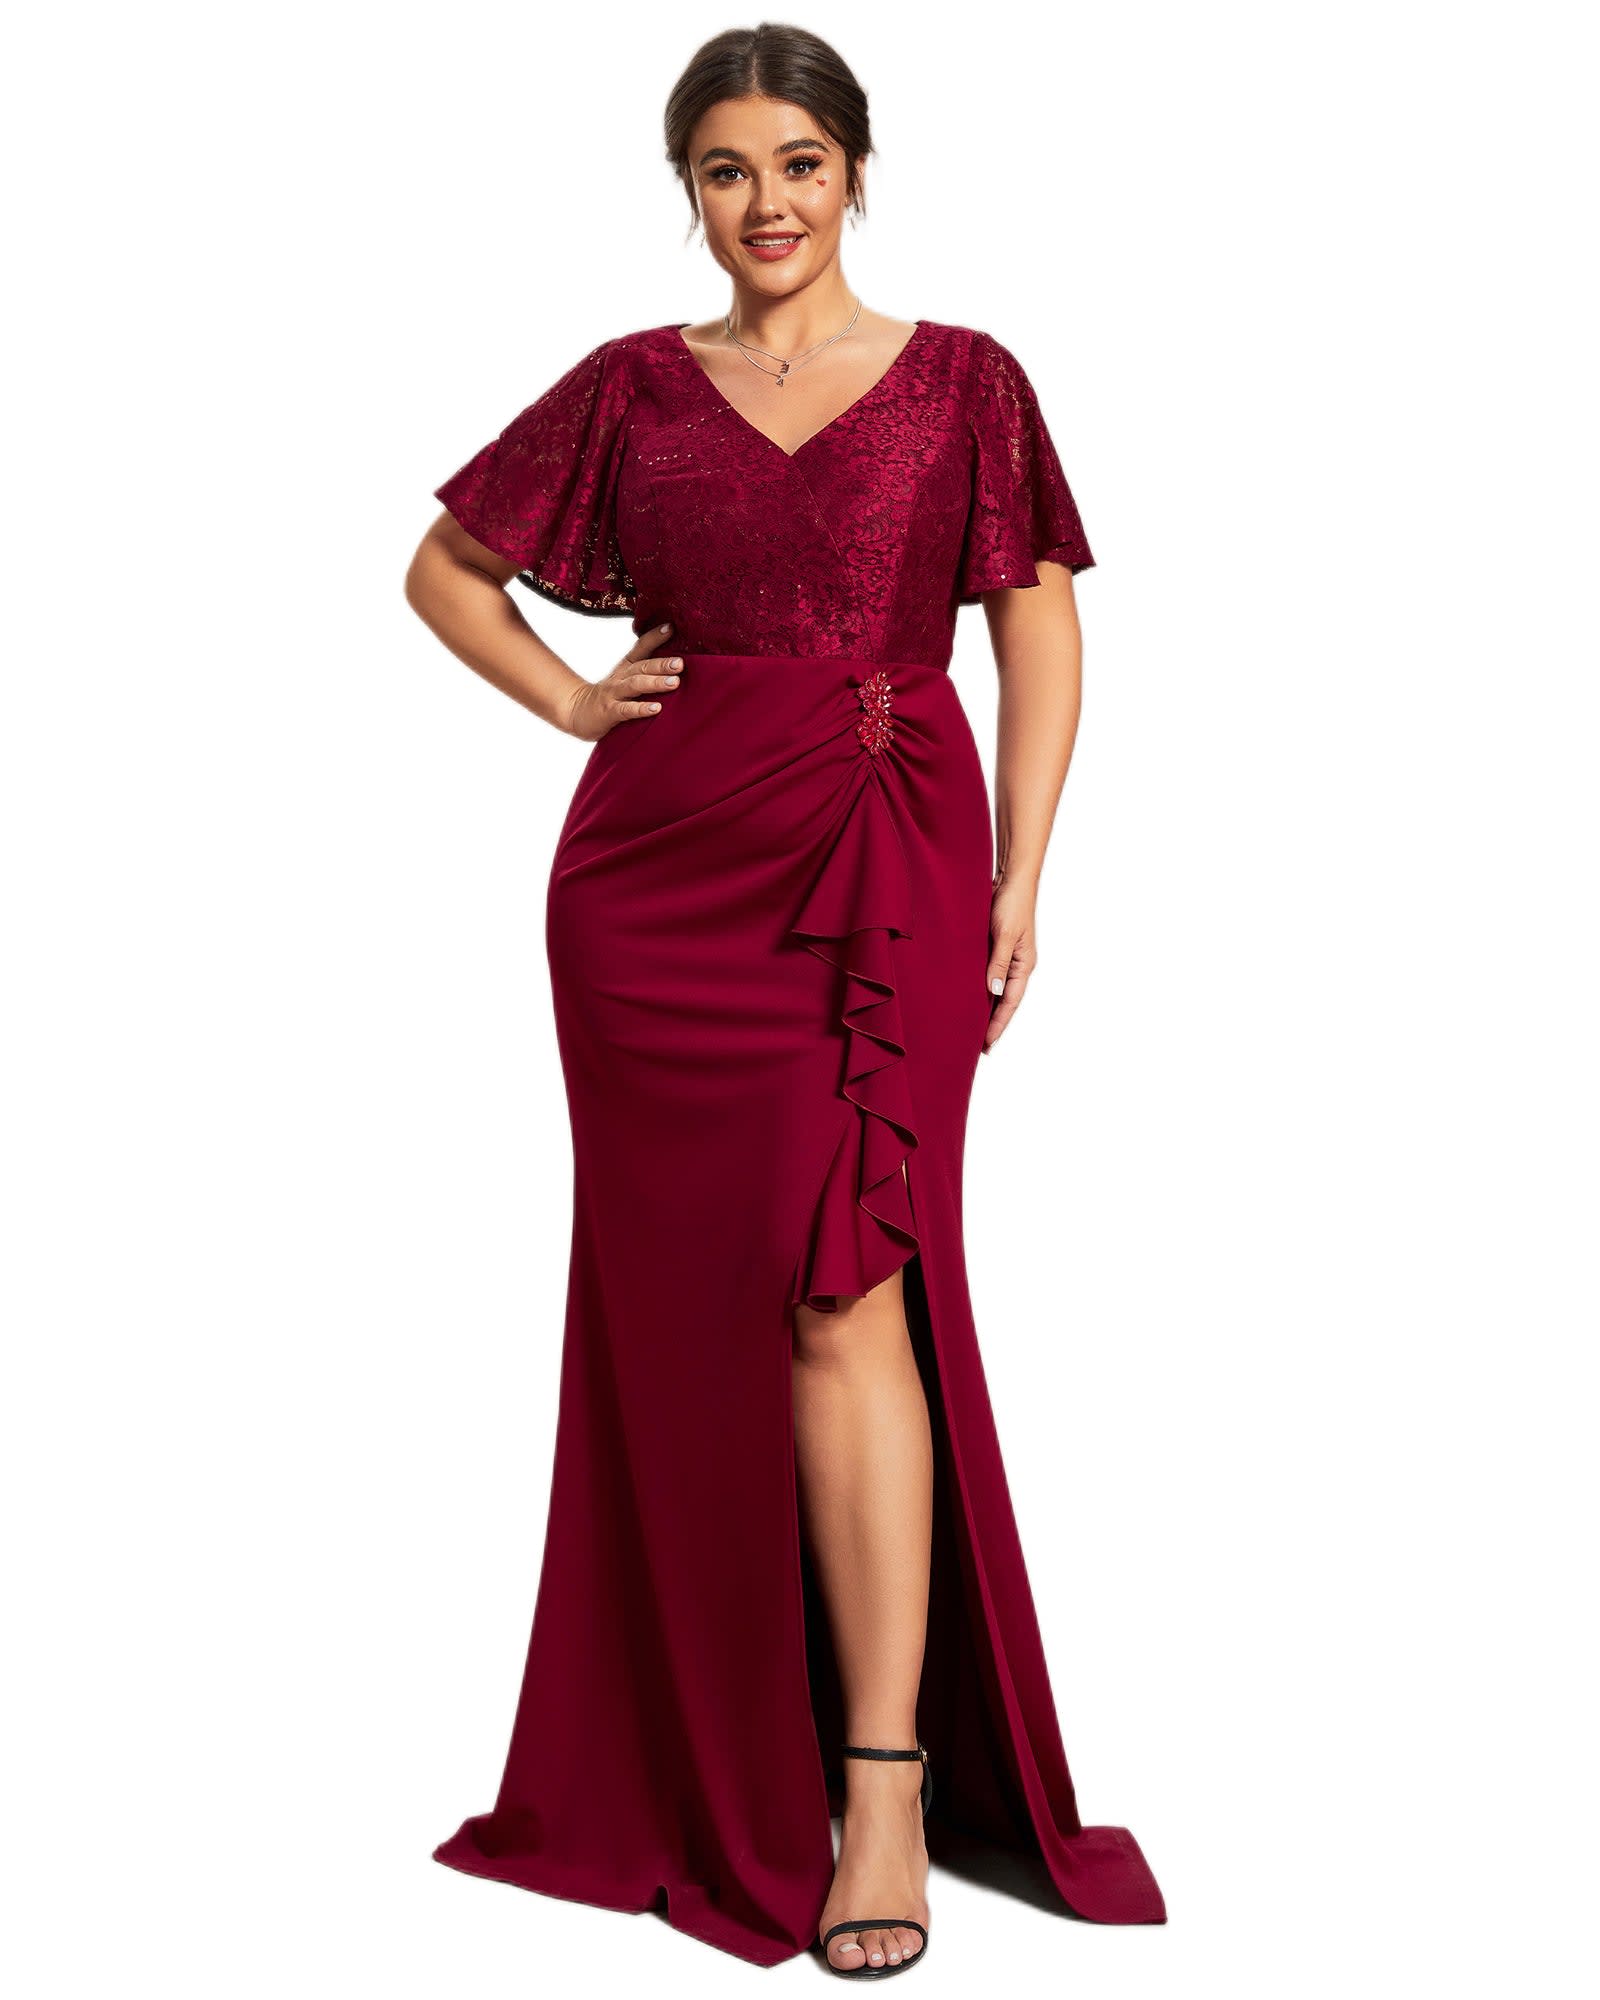 Lotus Leaf Hemline Bodycon Lace Top Mother of the Bride Dress | Burgundy